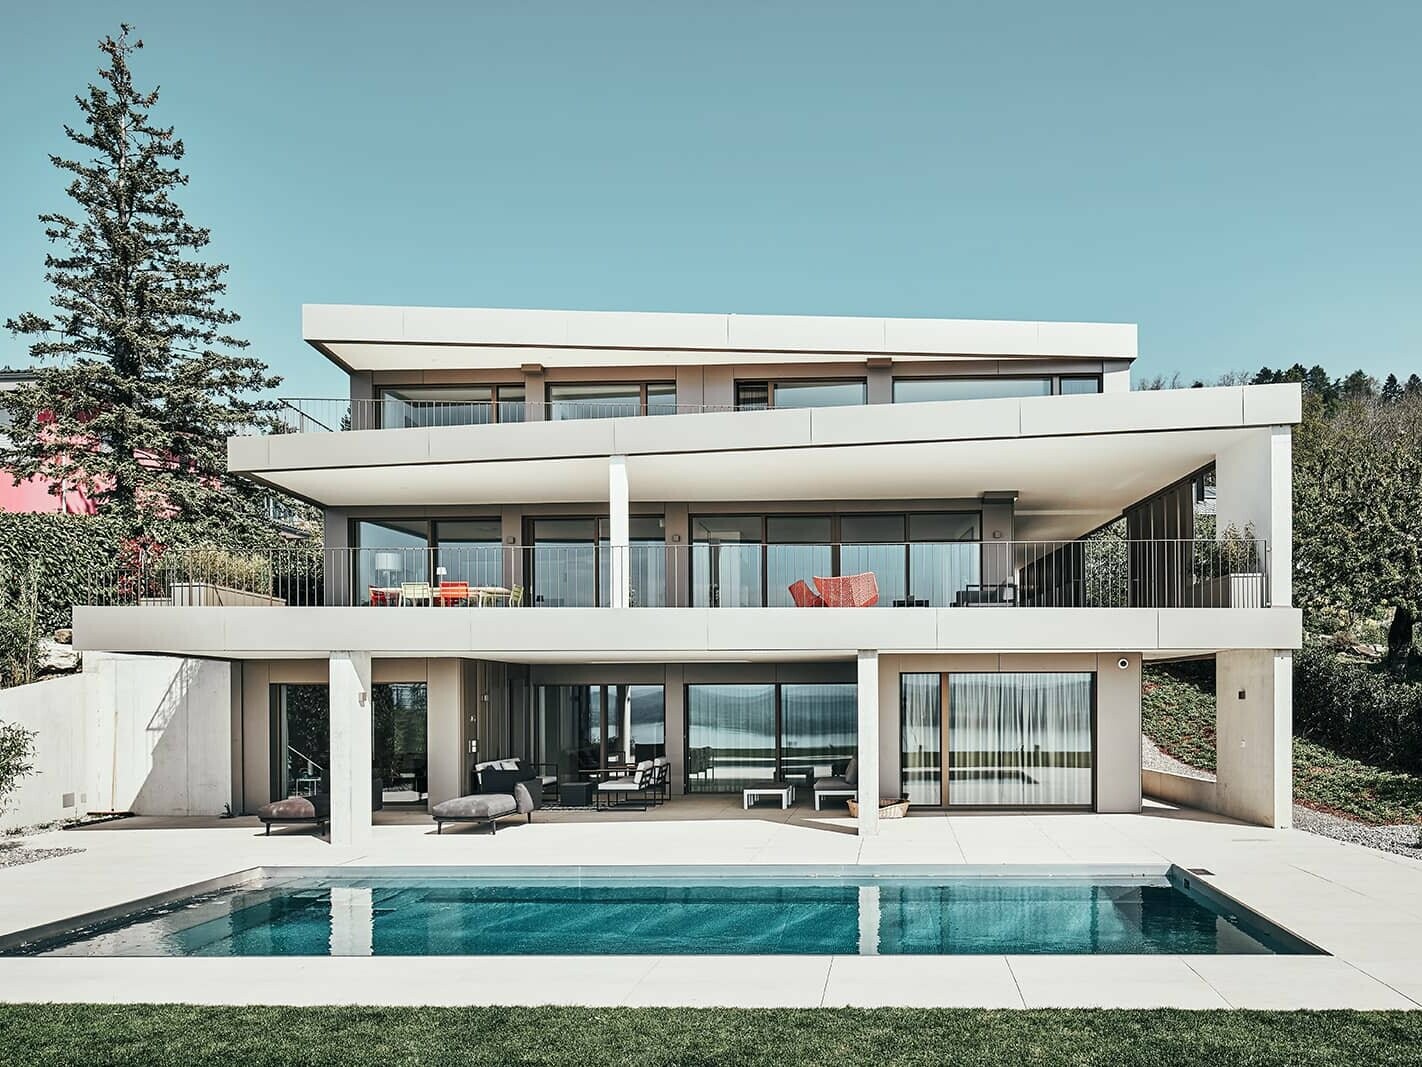 Front view of the detached house in Switzerland. You can see the pool in front of the house.